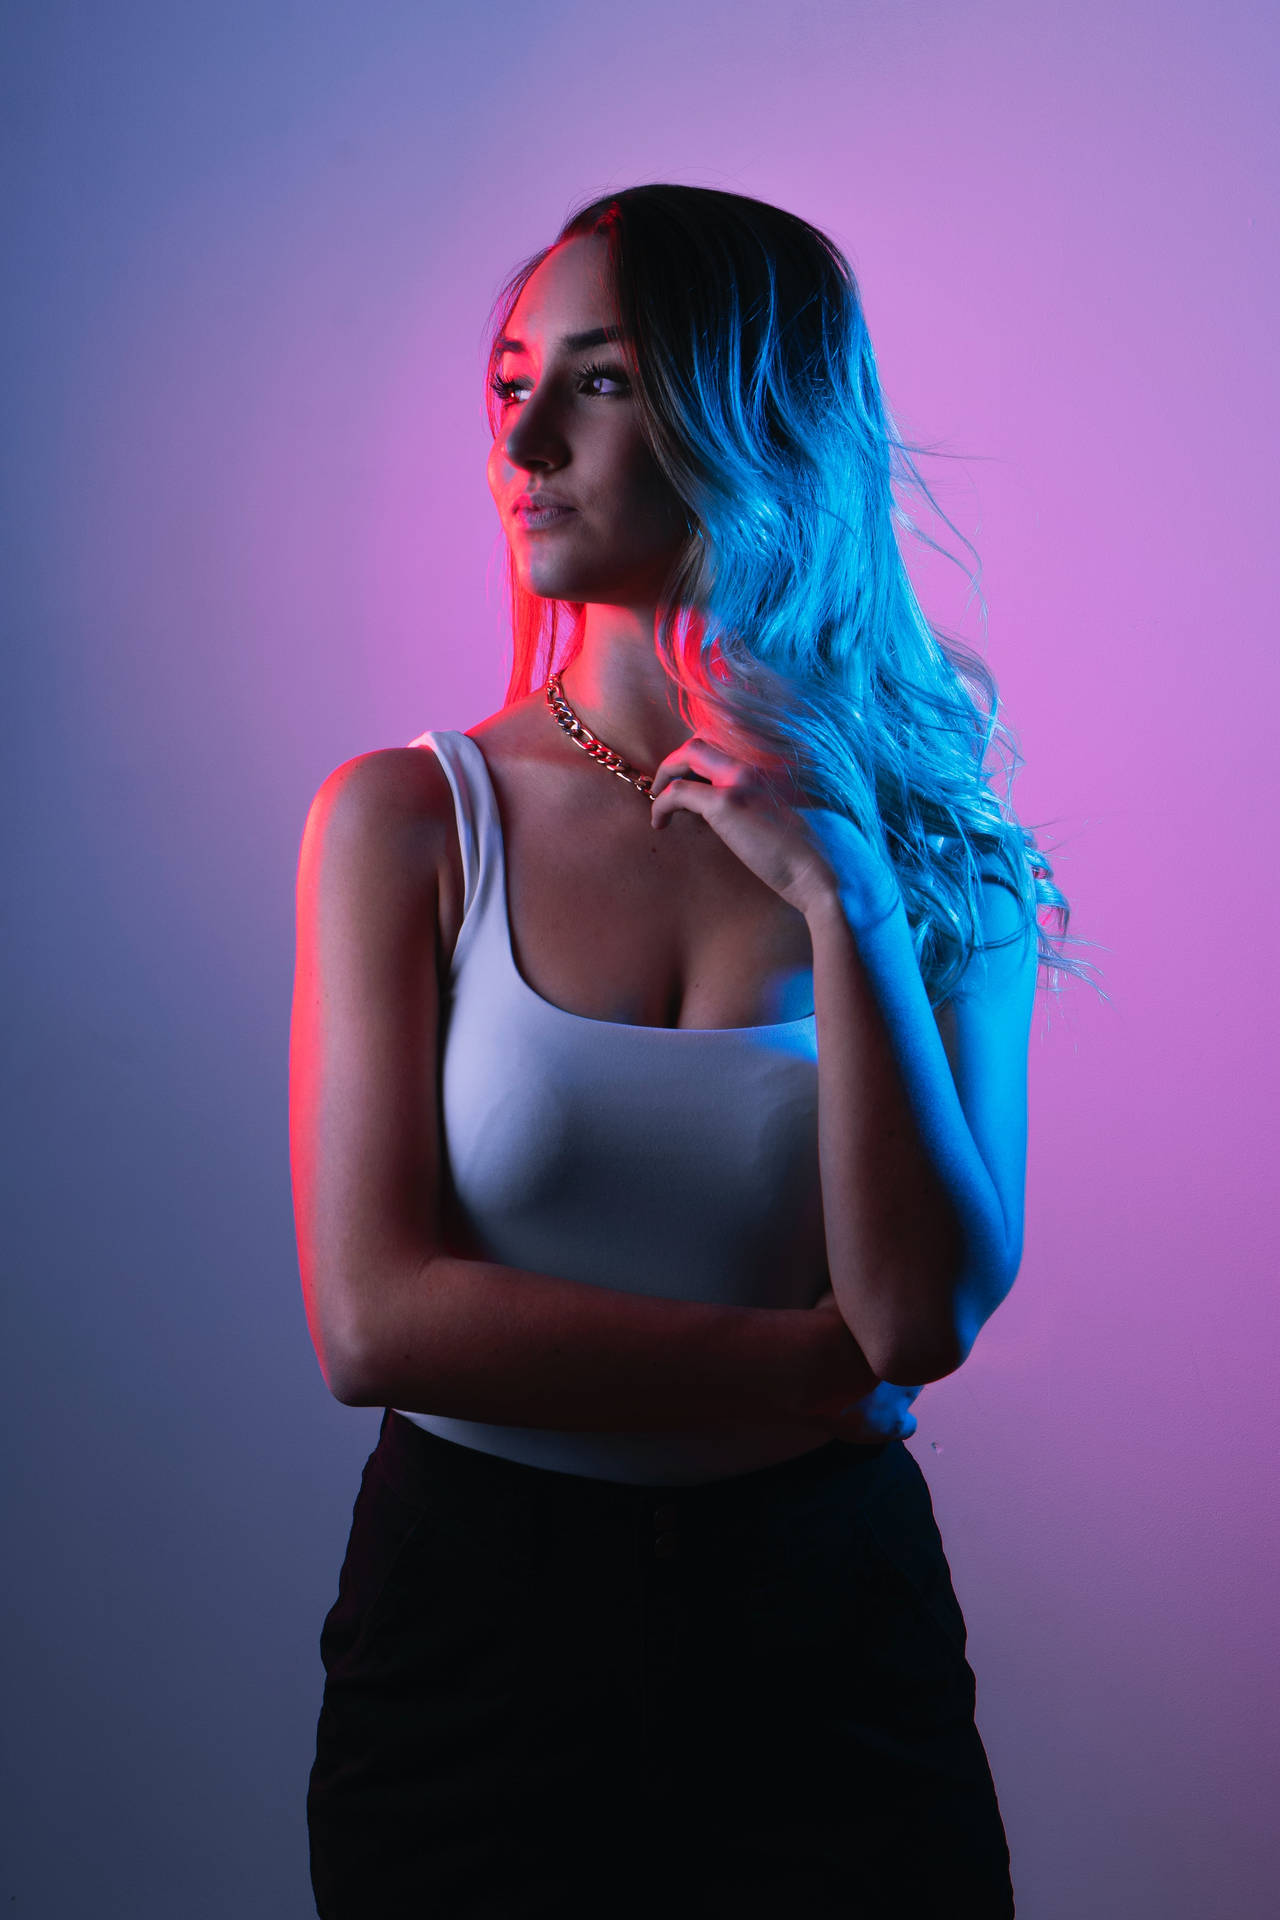 Female Model With Artistic Lights Wallpaper